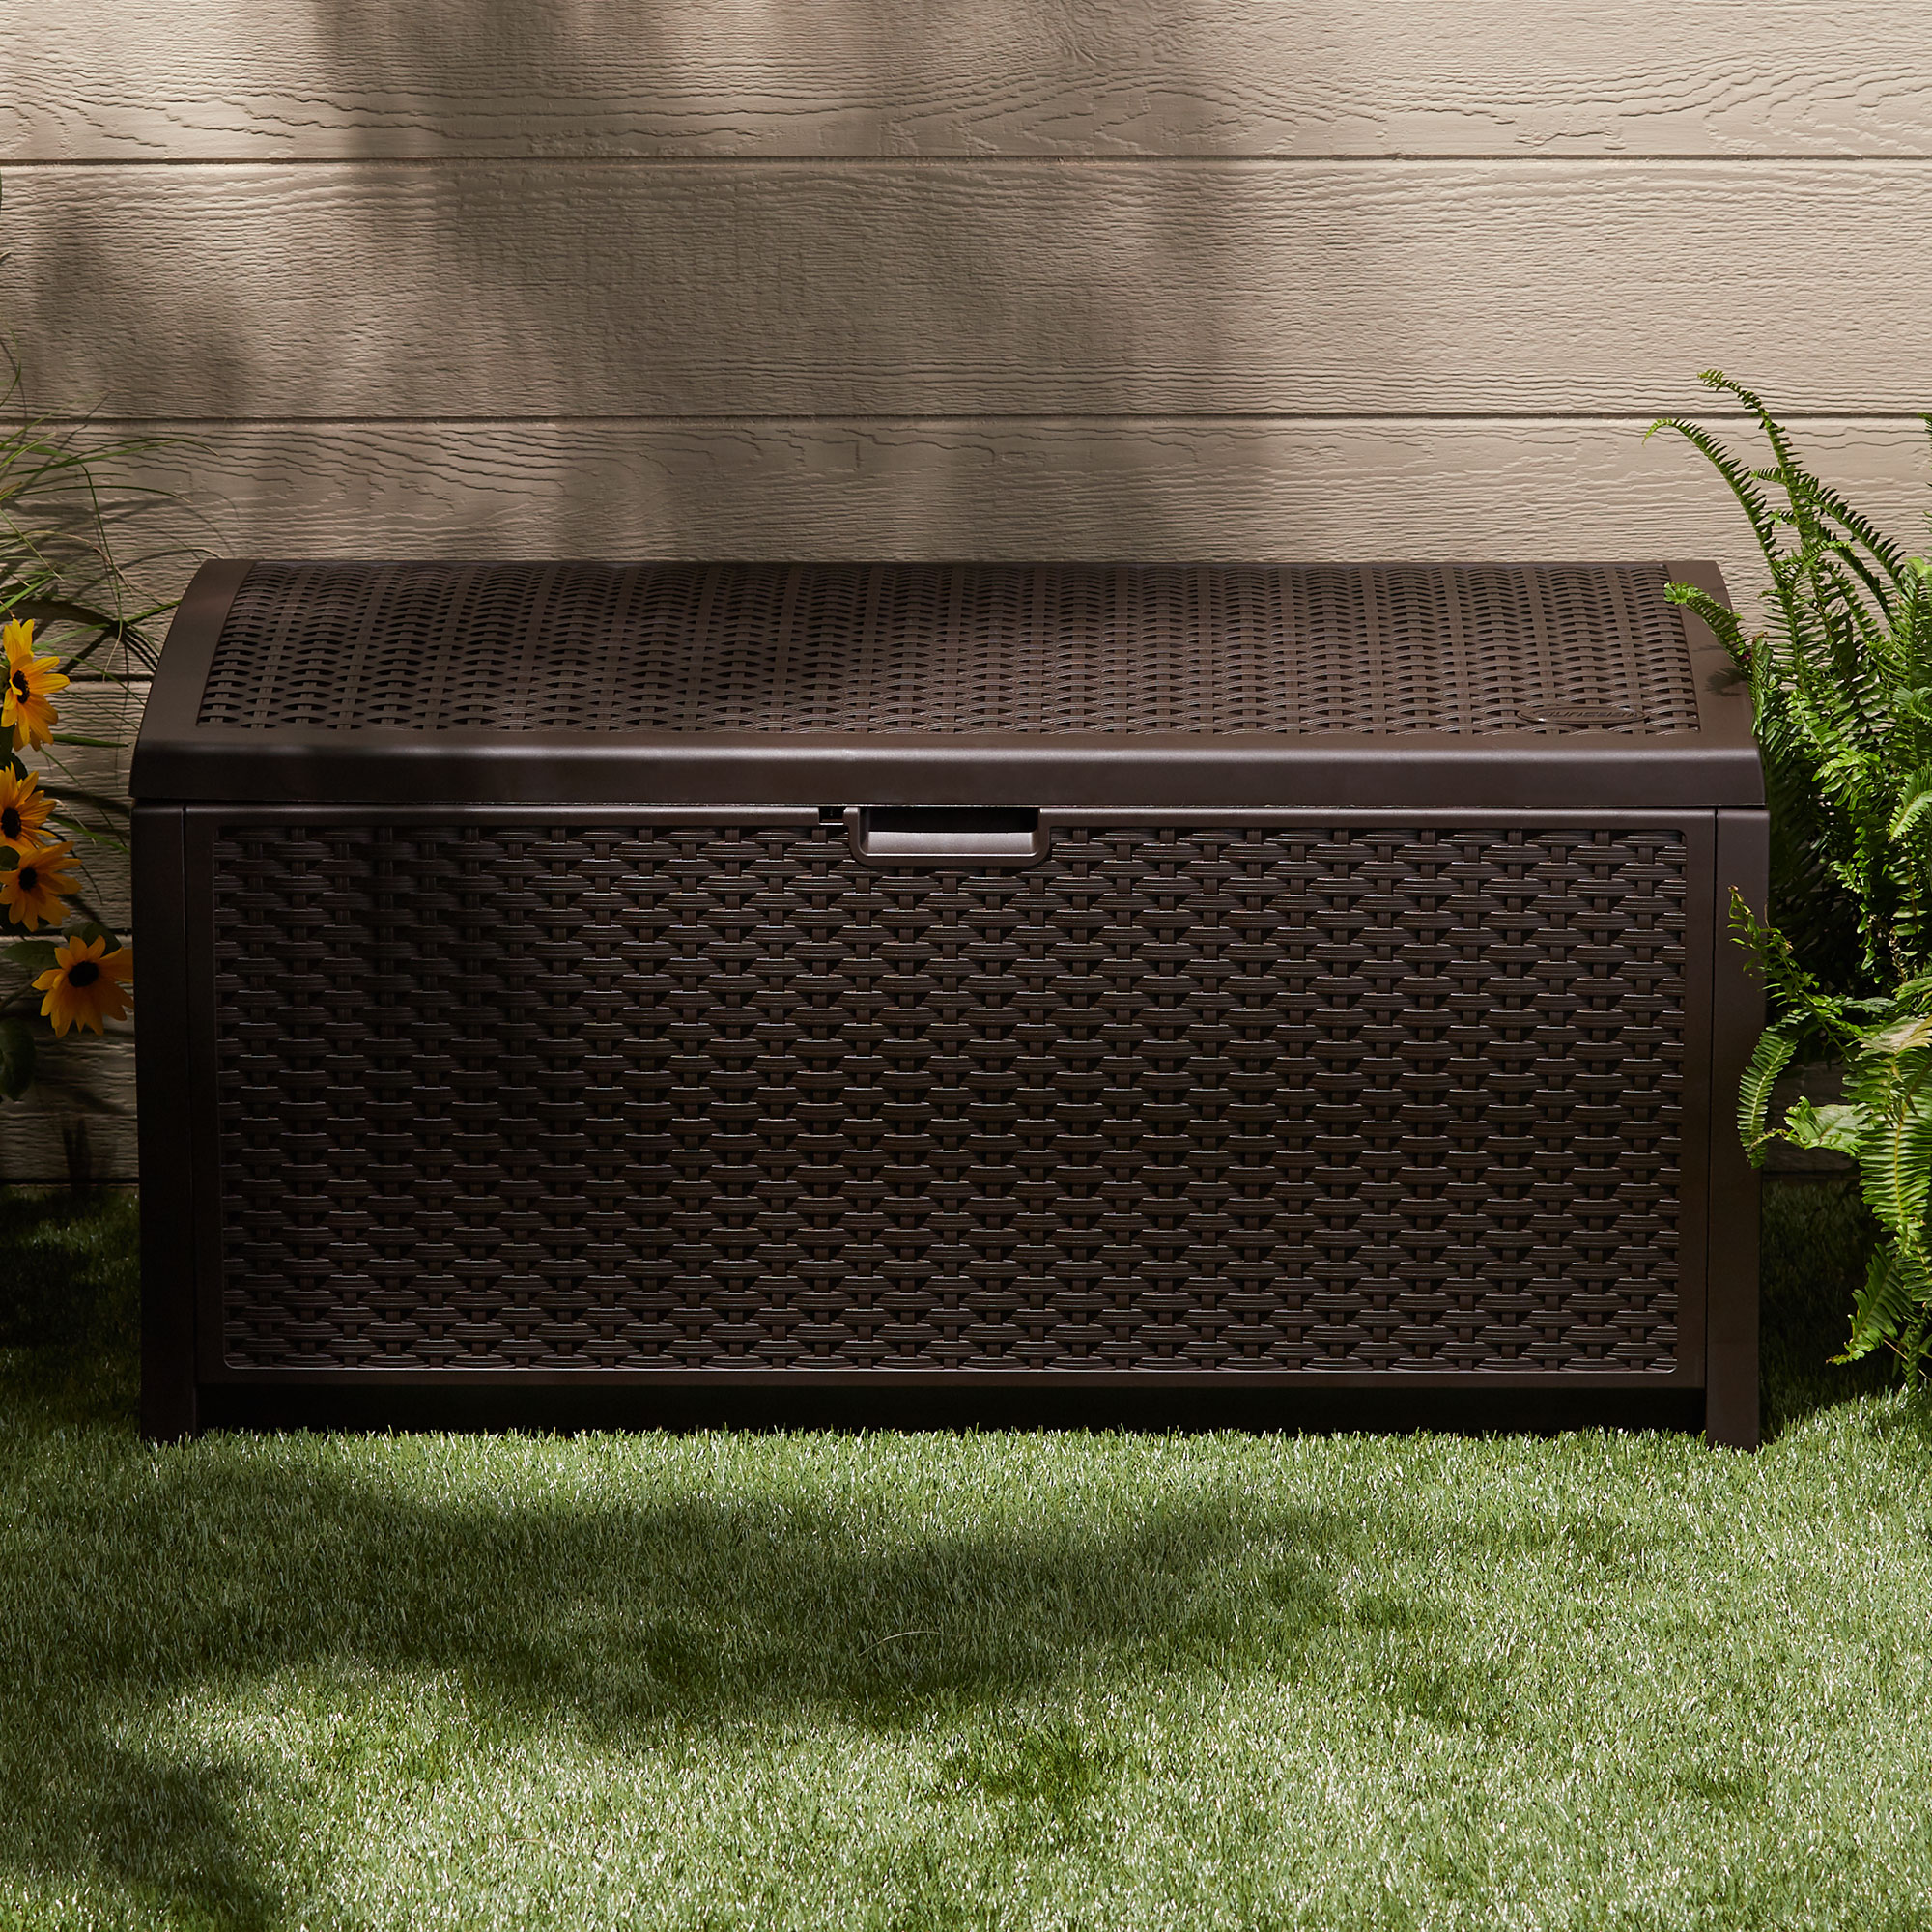 Suncast Indoor and Outdoor 73 Gallon Resin Deck Box with Seat, Mocha Brown, 46 in D x 22.5 in H x 21.6 in W - image 7 of 8